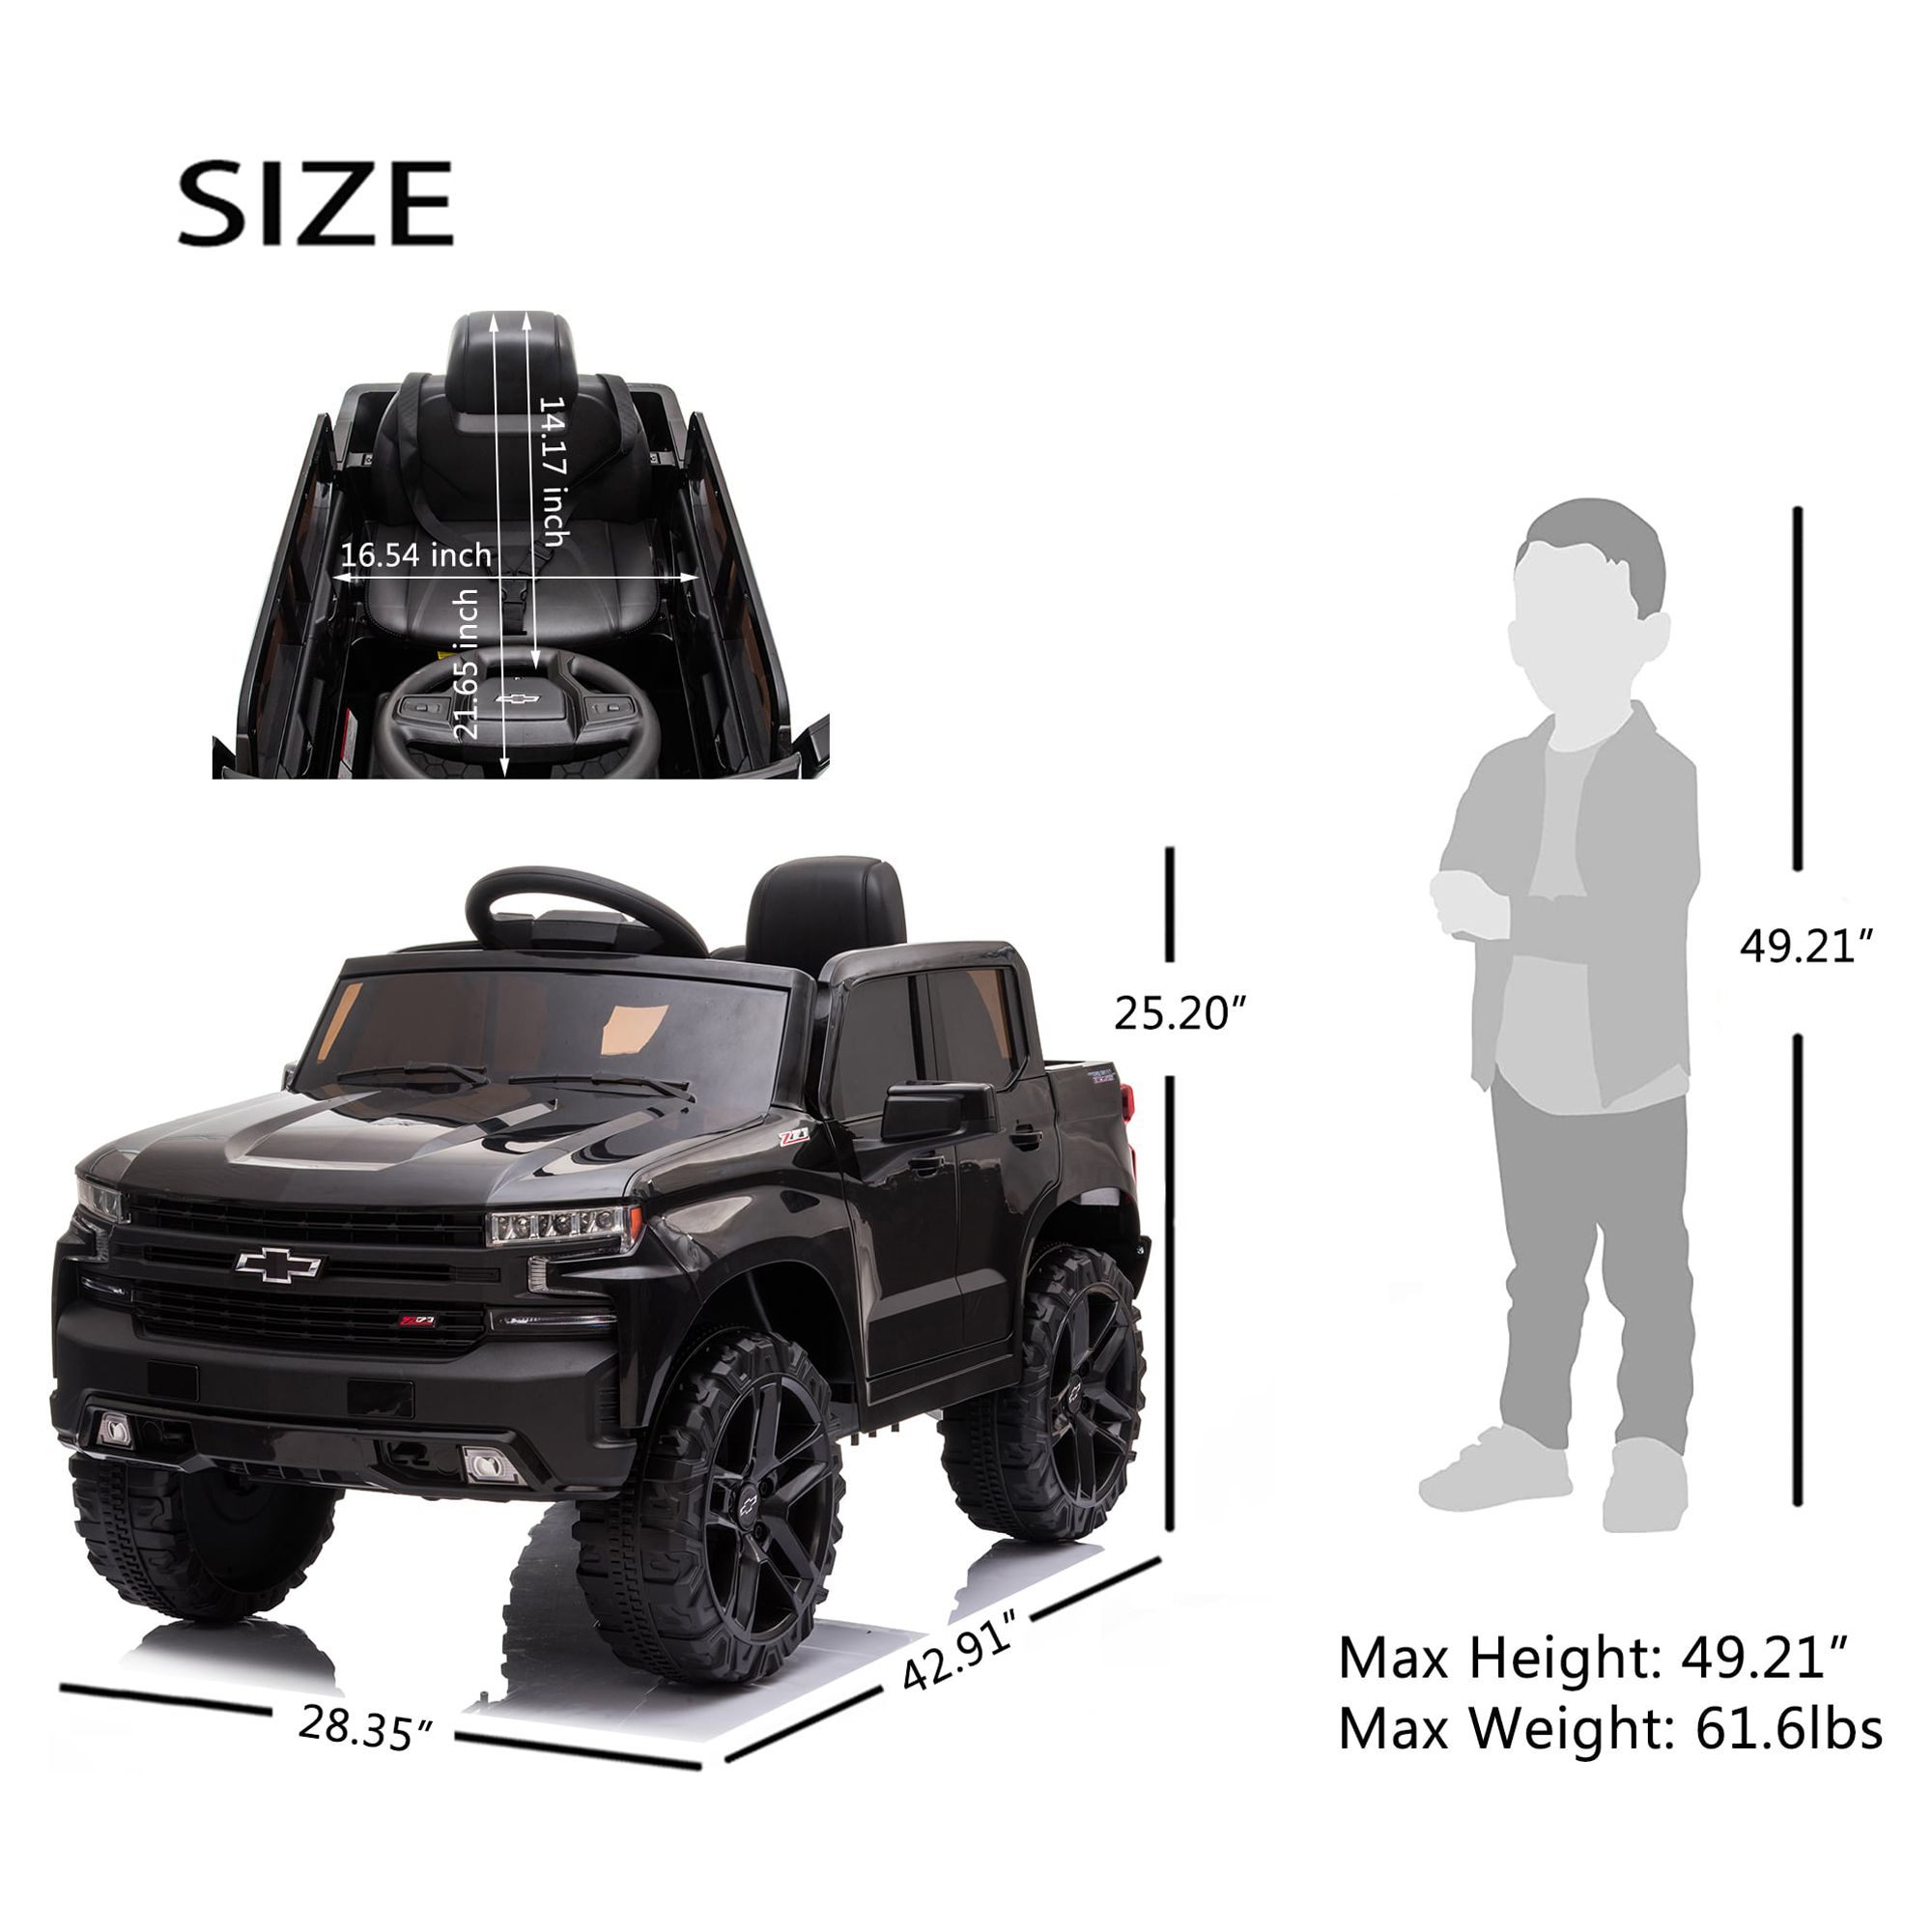 Official Licensed Chevrolet Ride On Car, 12V Ride-On Truck Toy for Kids, Electric 4 Wheels Kids Toy w/Parent Remote Control, Foot Pedal, MP3 Player, 2 Speeds, Ages 3-5 Years - image 3 of 9